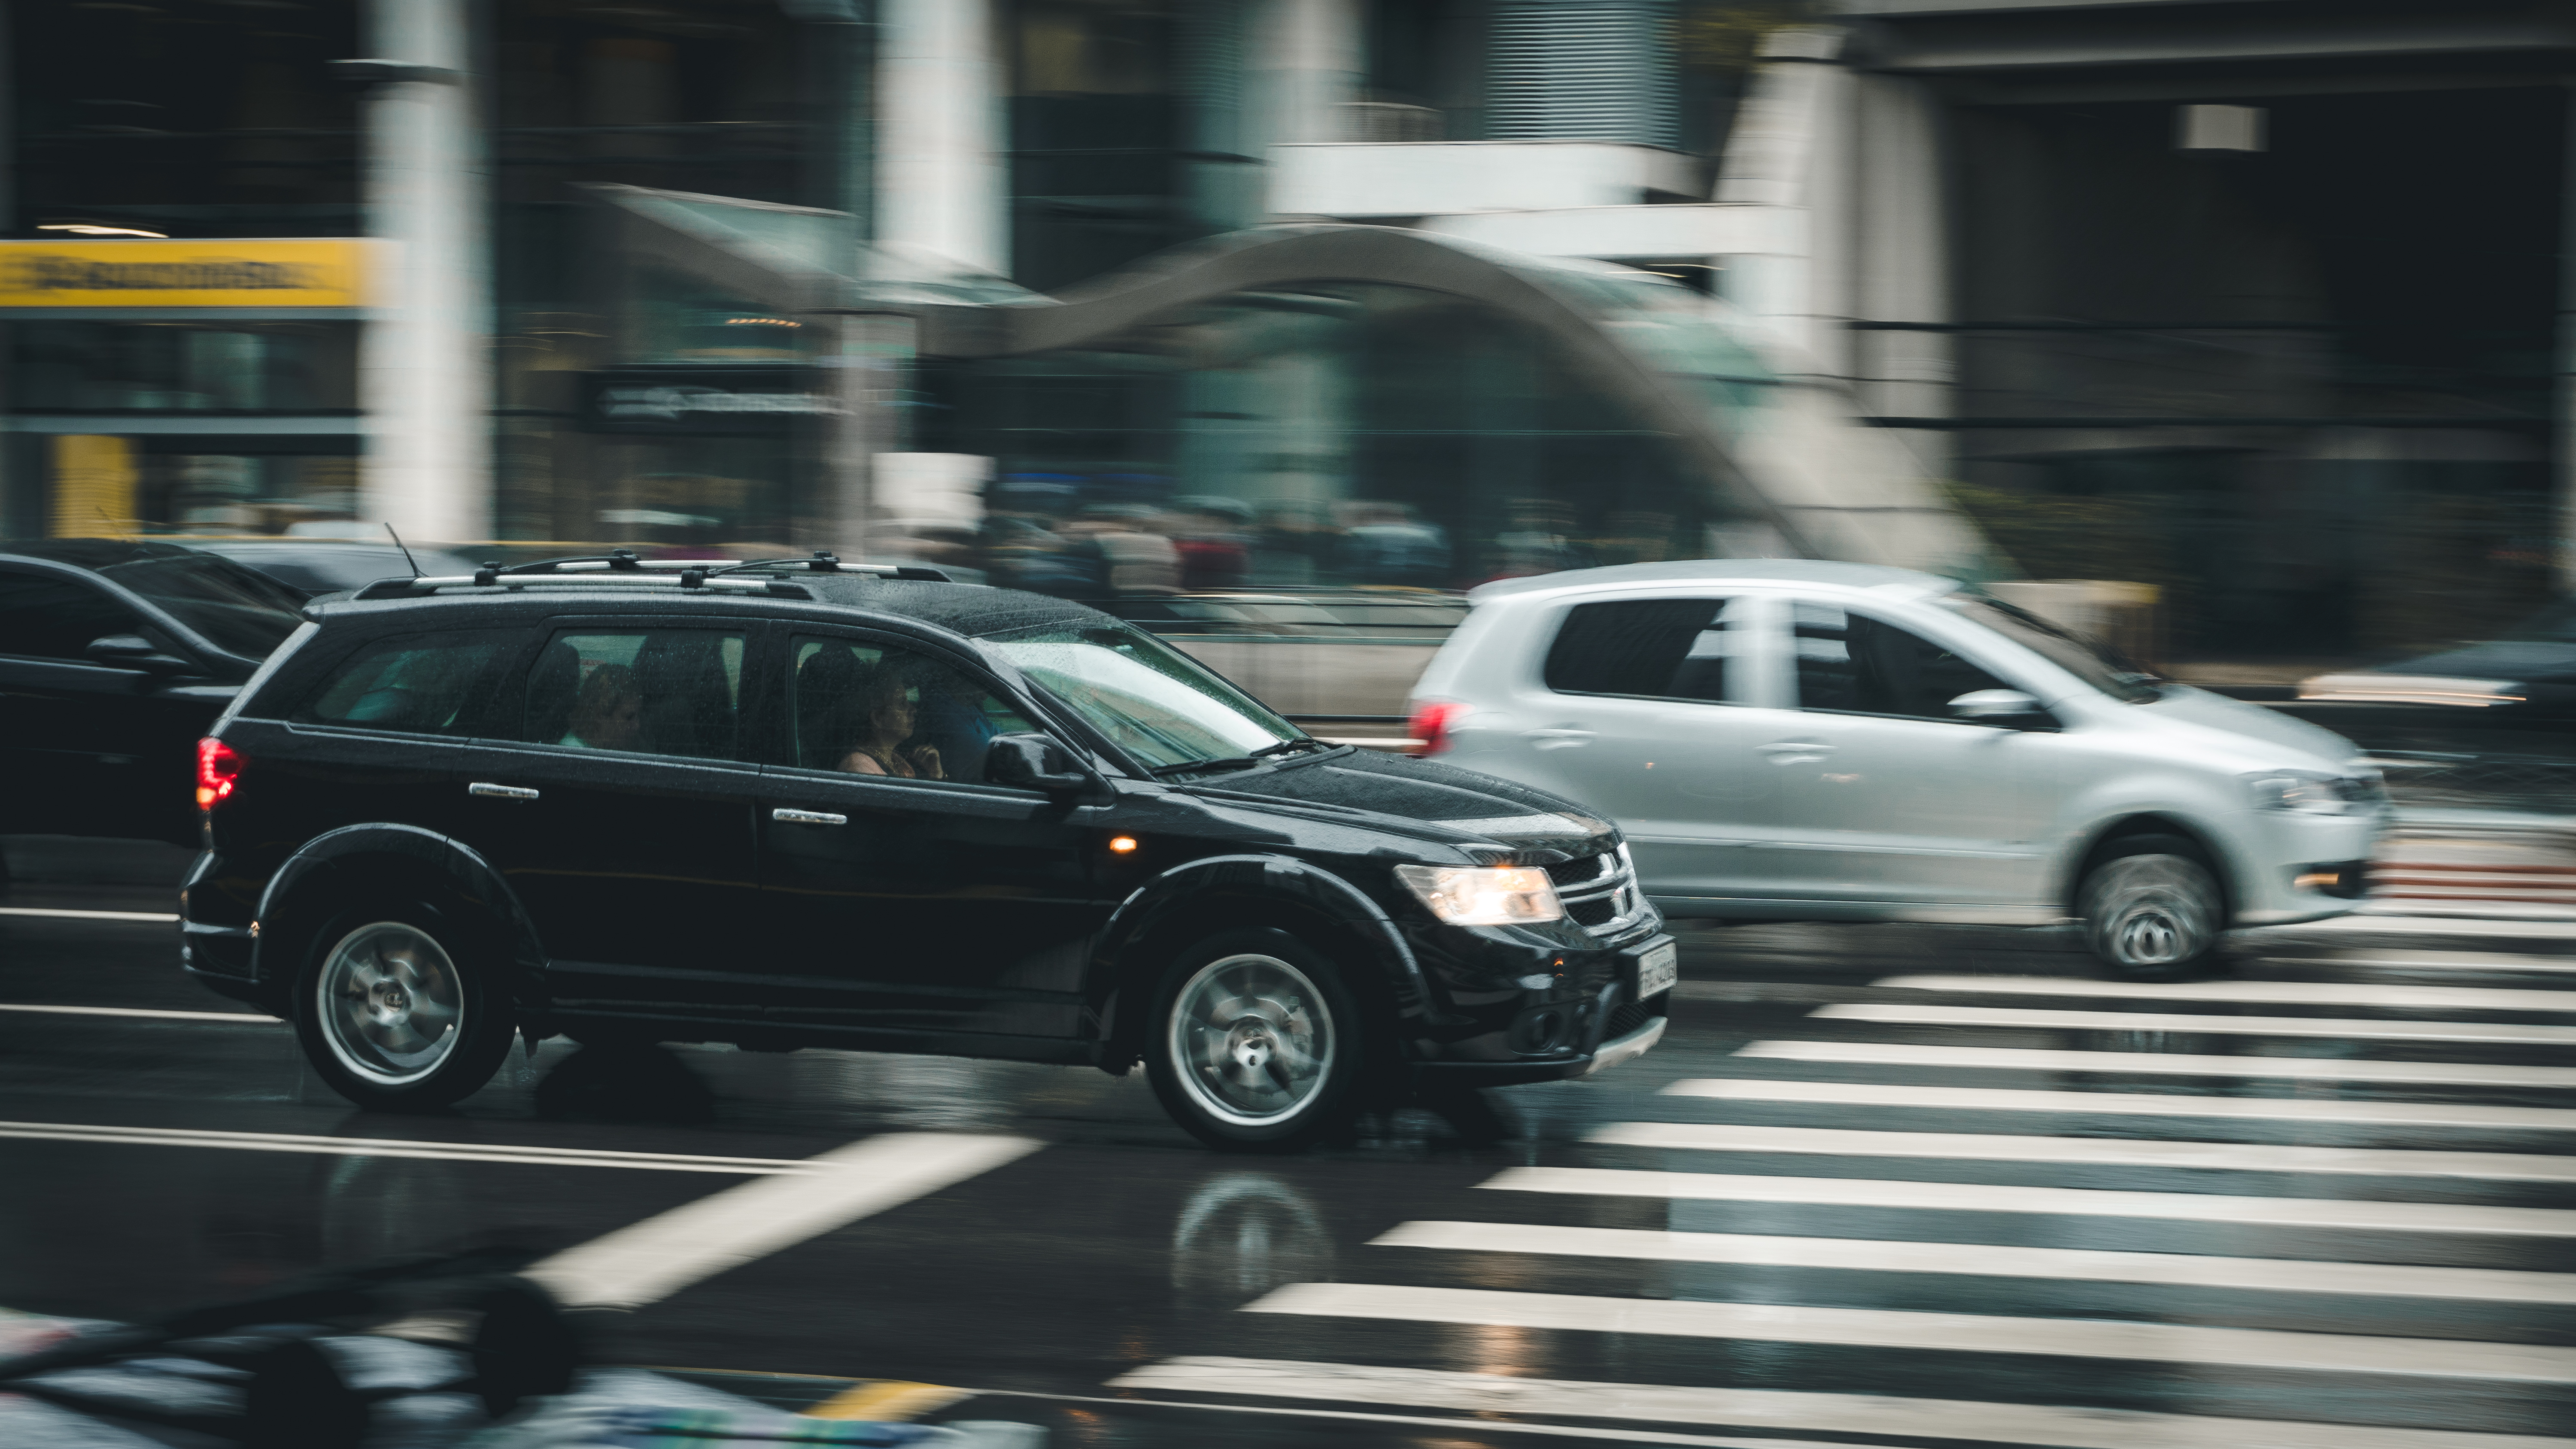 Personal injury claims against individual drivers are difficult enough to handle on your own.